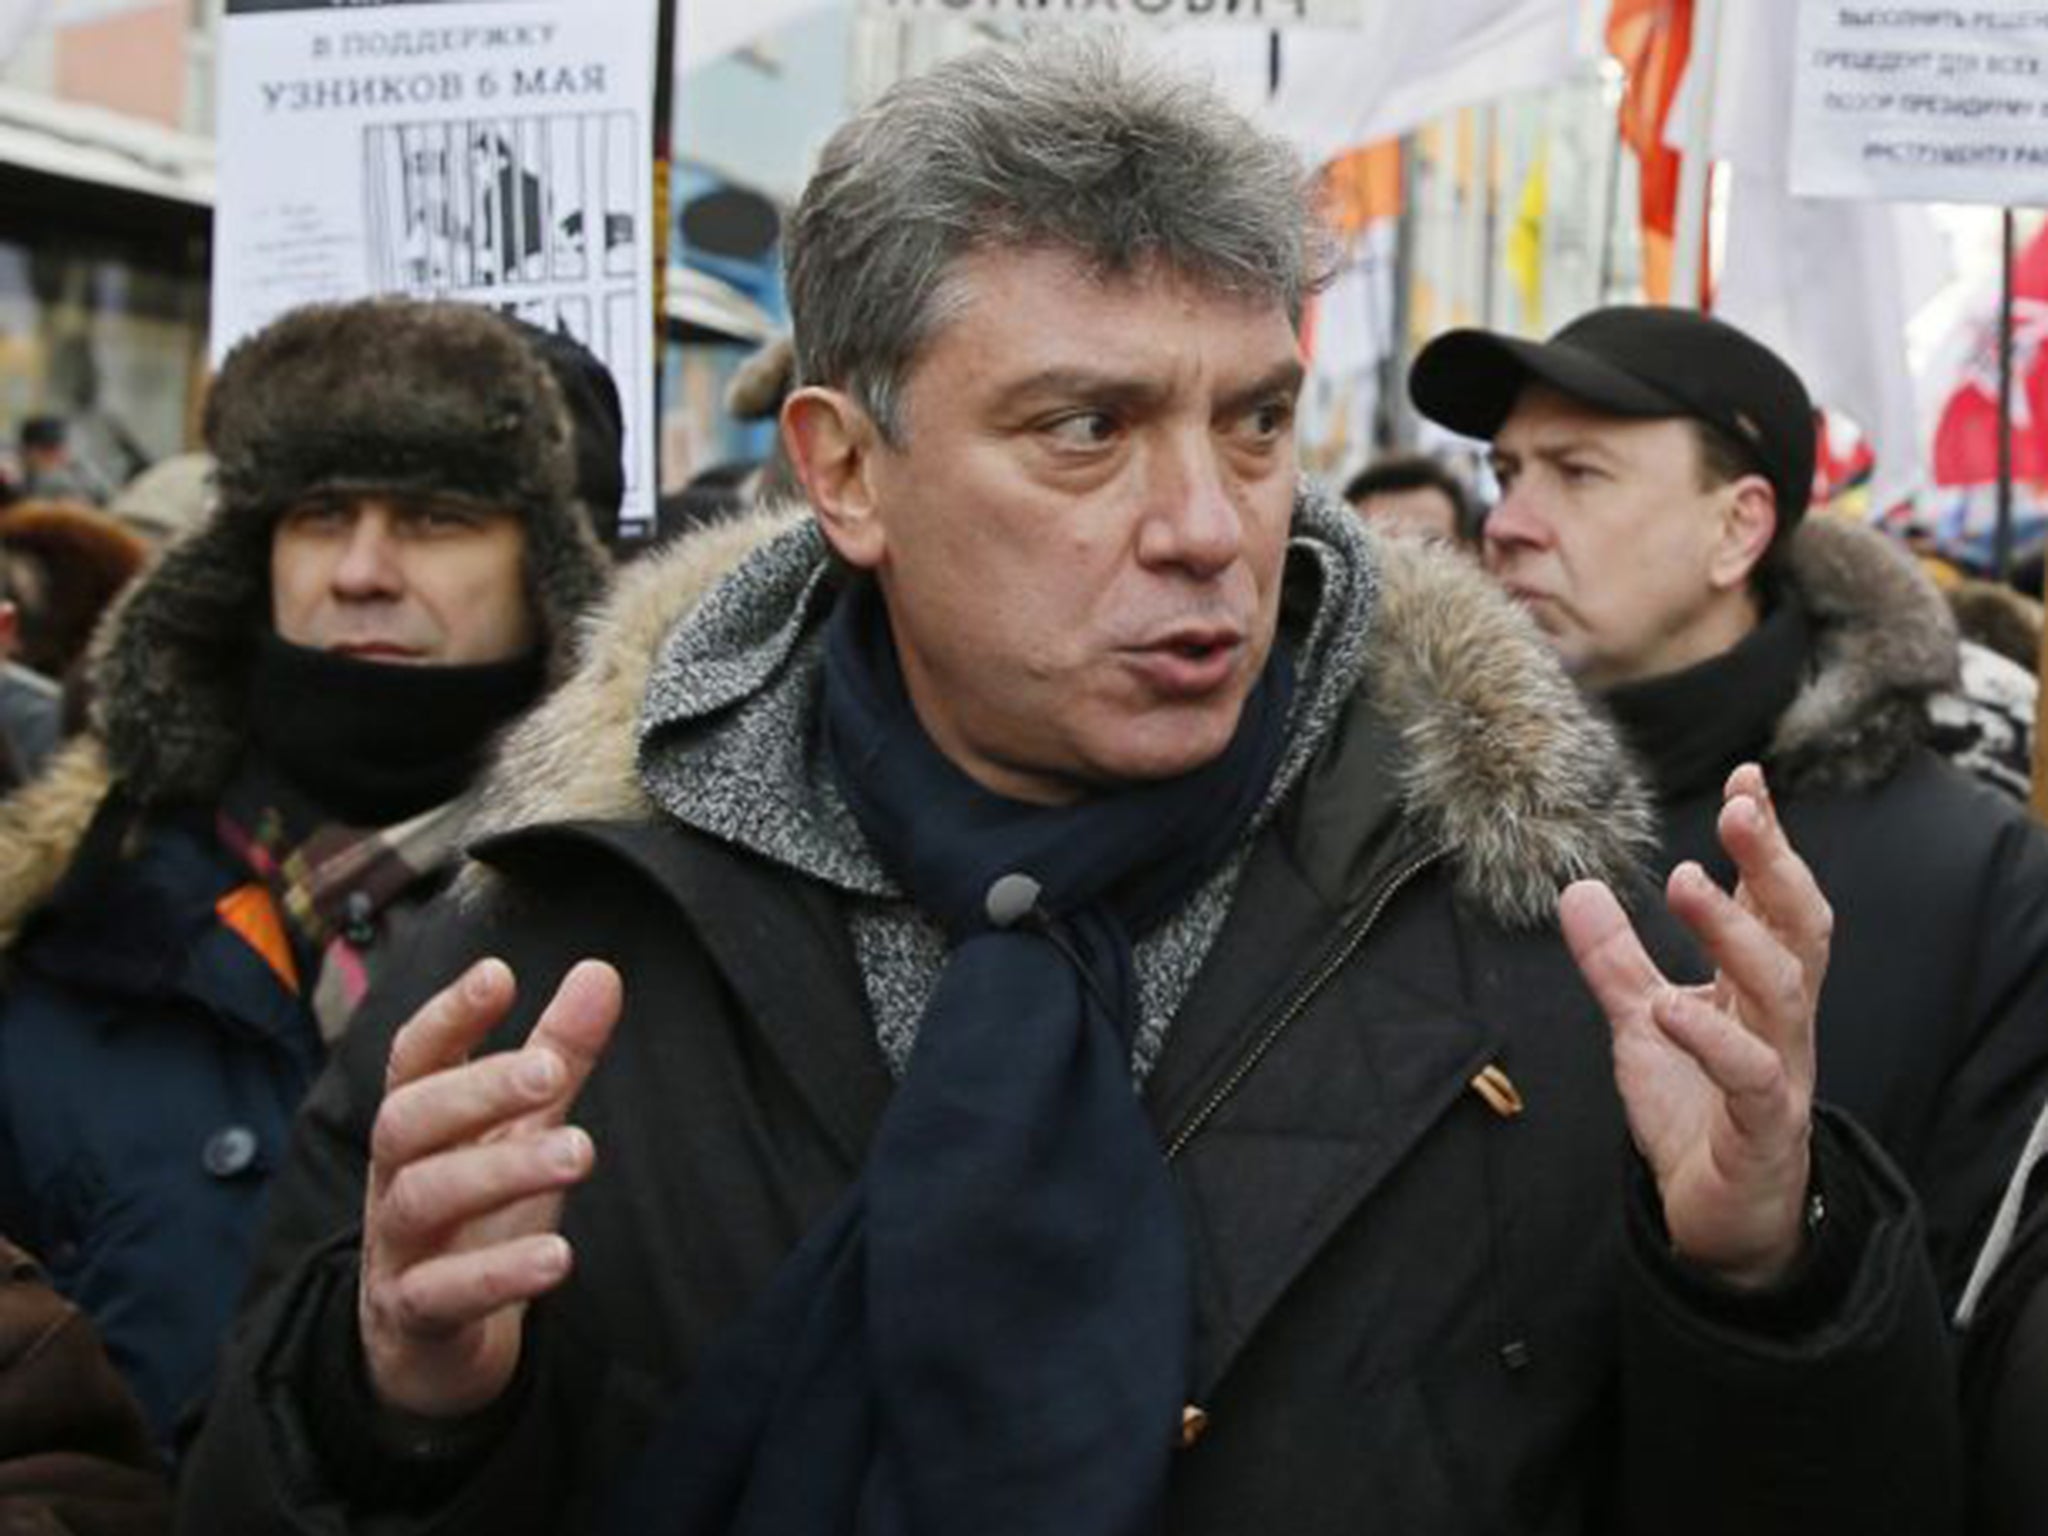 Putin critic: Boris Nemtsov took a leading role in the opposition to the Kremlin’s policies